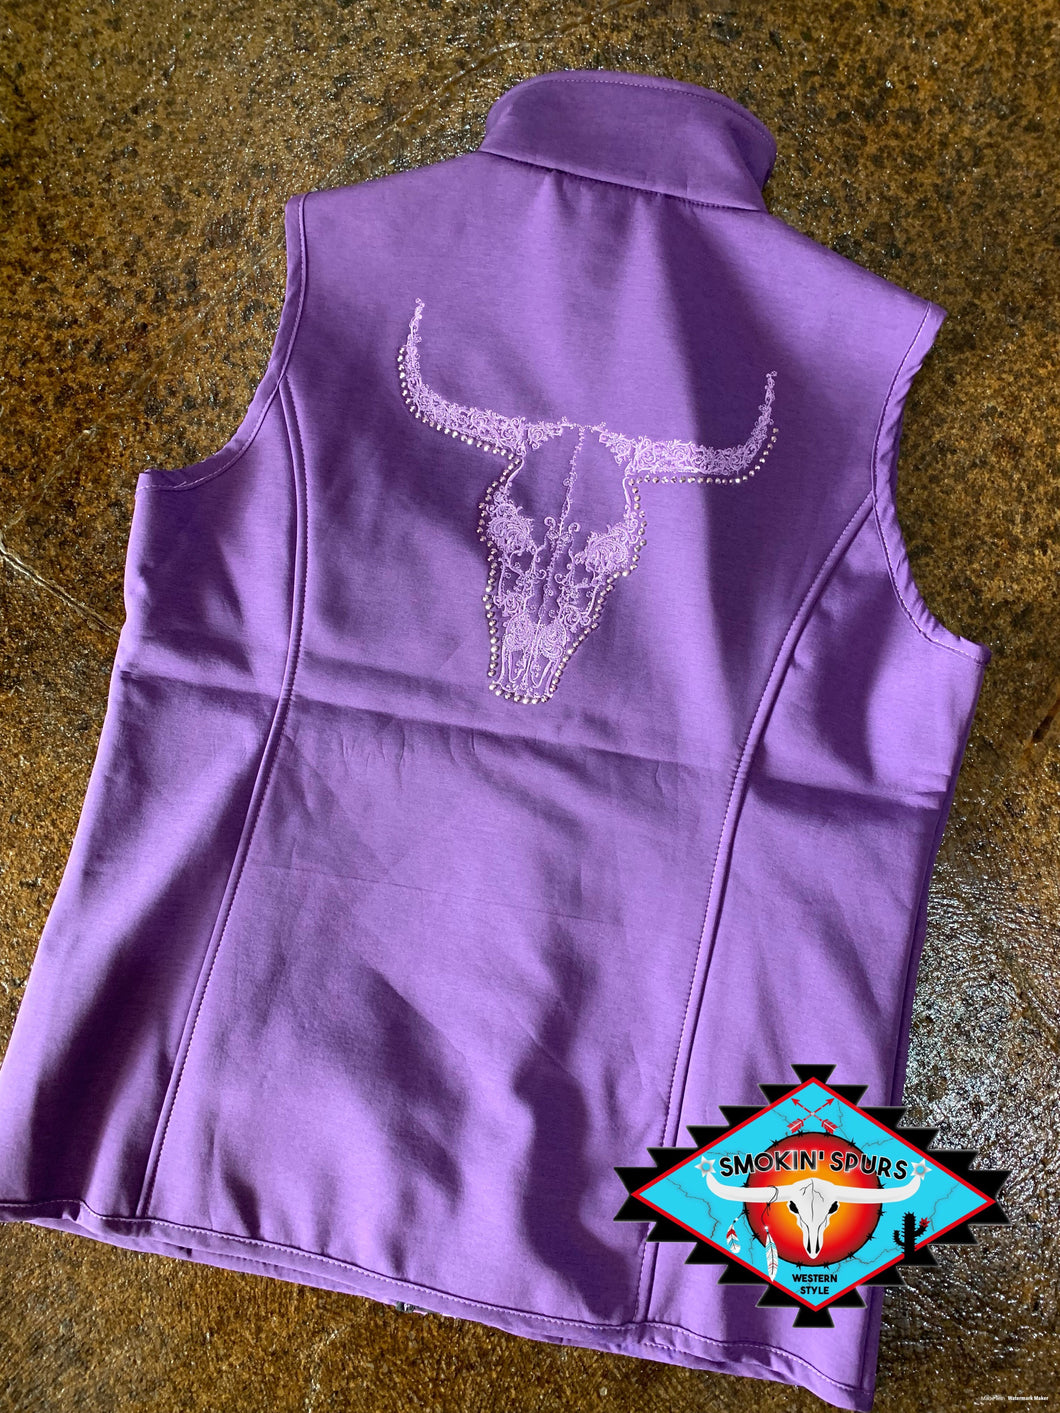 Women’s Cowgirl Hardware poly shell vest !!